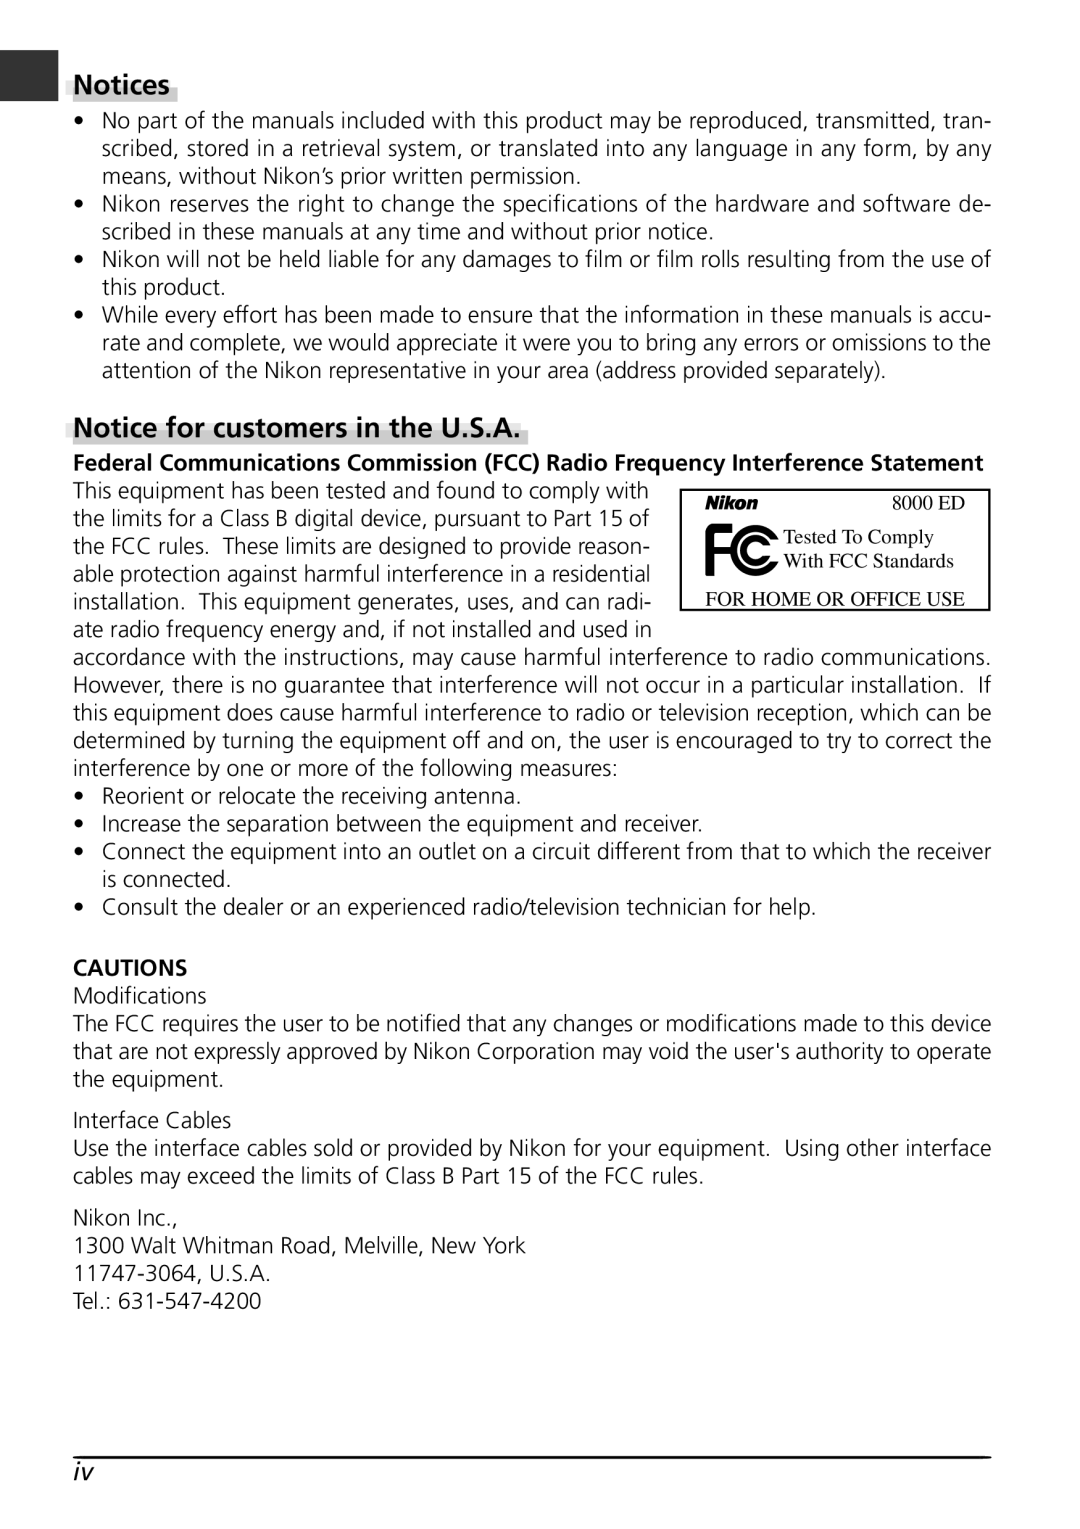 Nikon LS8000 user manual Notices, Notice for customers in the U.S.A, Cautions 